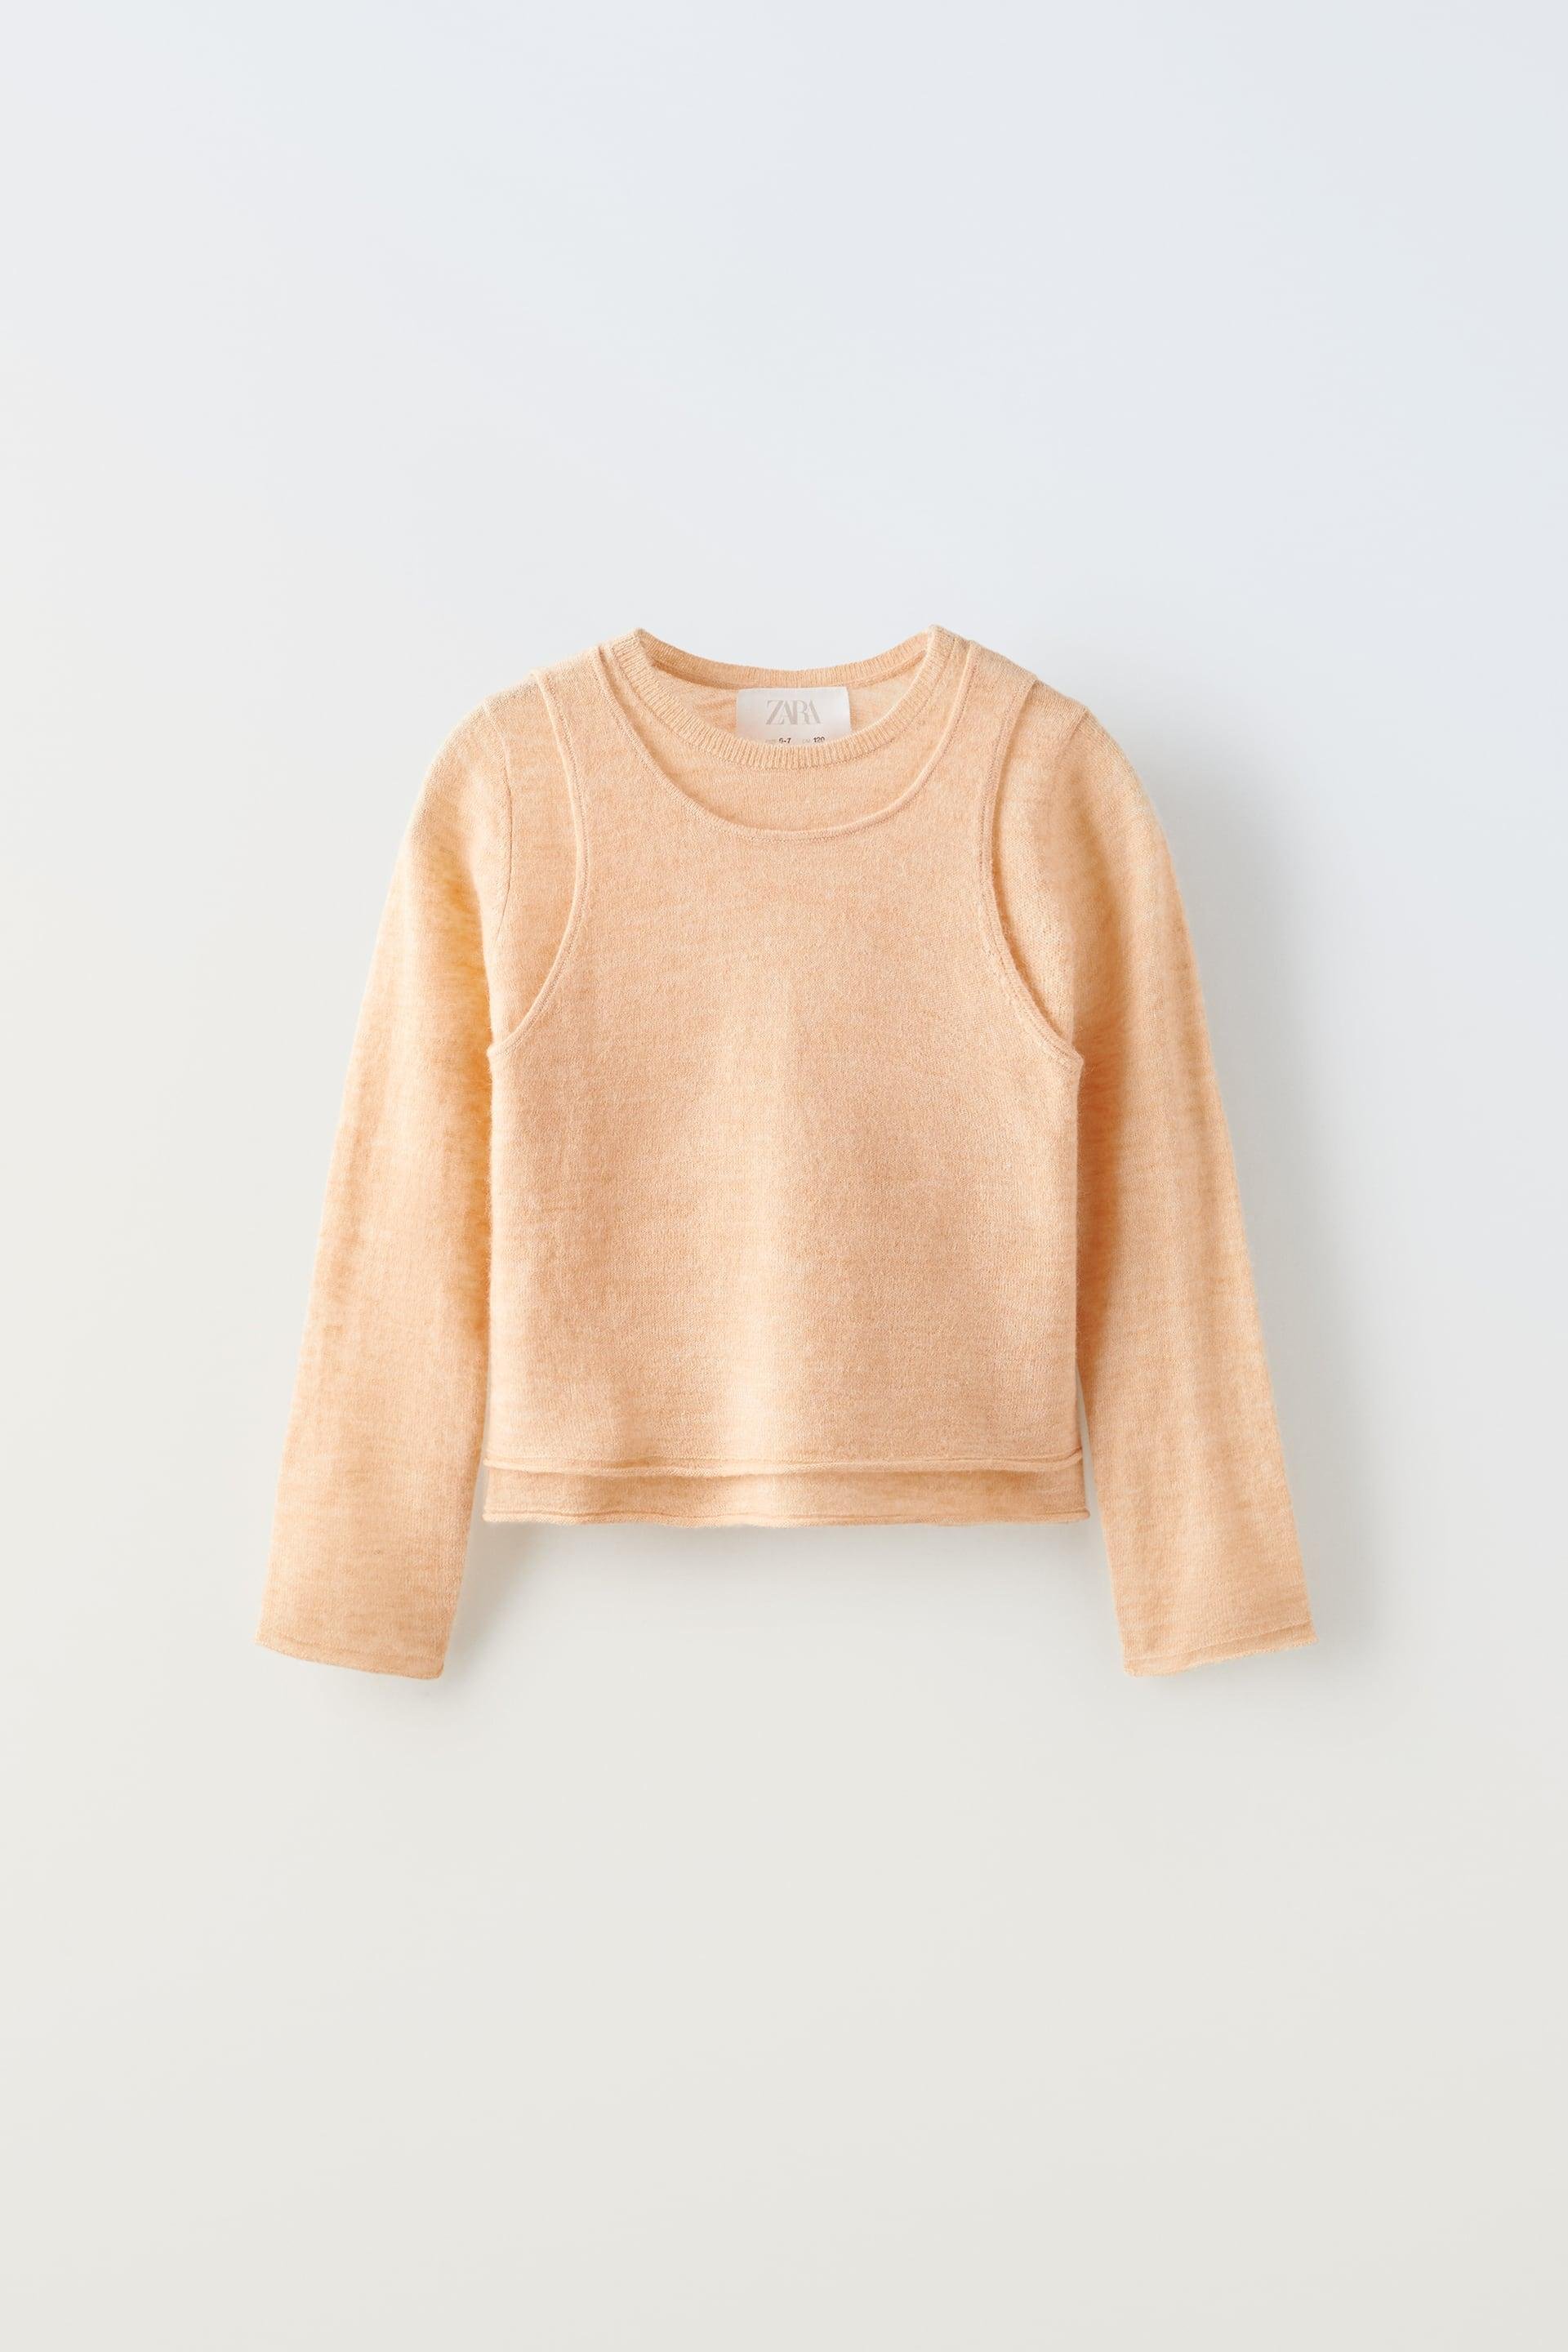 OVERLAY DETAIL SWEATER LIMITED EDITION by ZARA